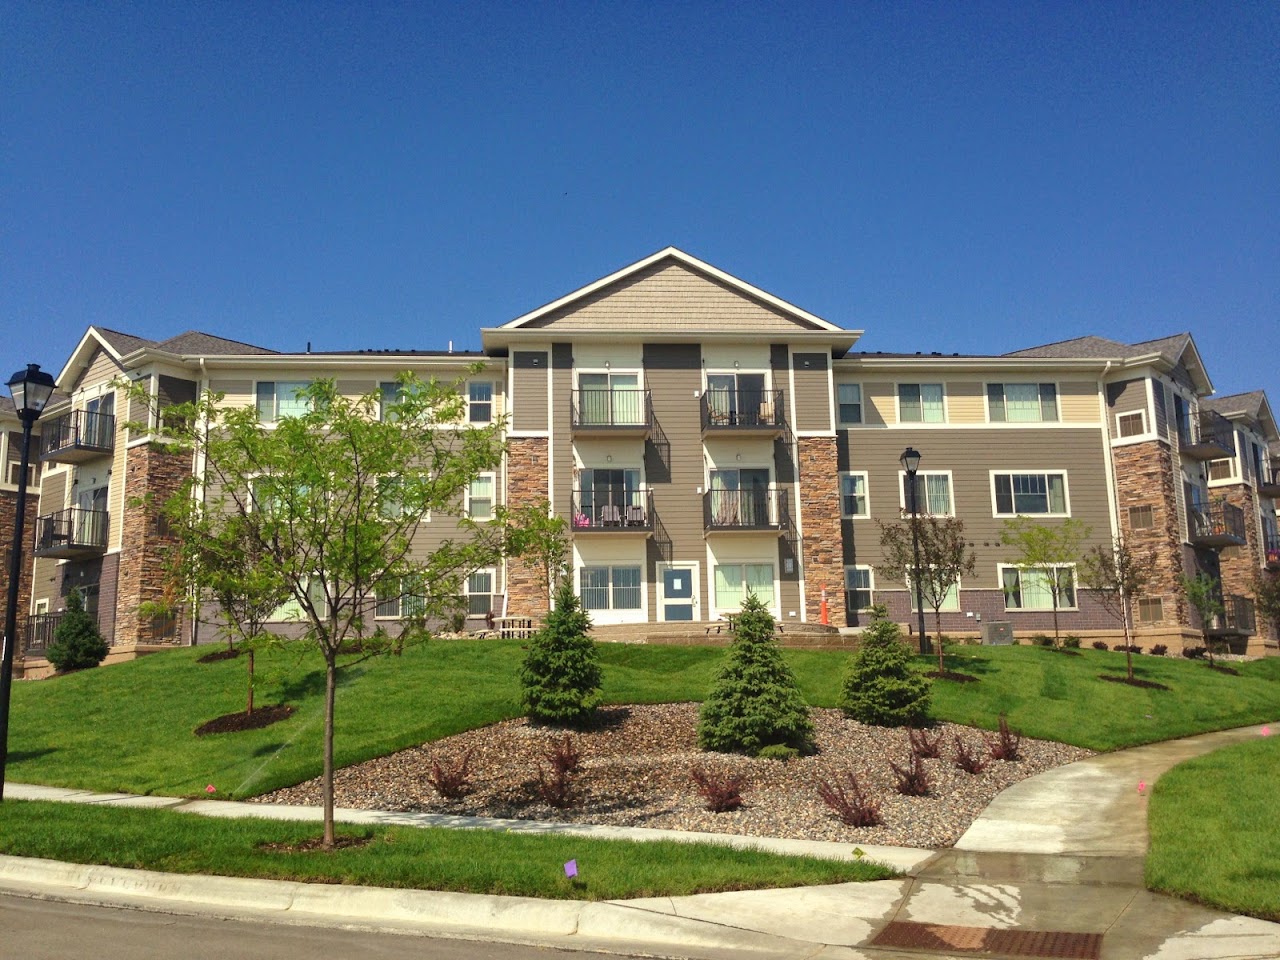 Photo of VILLAGE COMMONS. Affordable housing located at CONNELLY PARKWAY - WEST VIRGINIA COURT SAVAGE, MN 55378